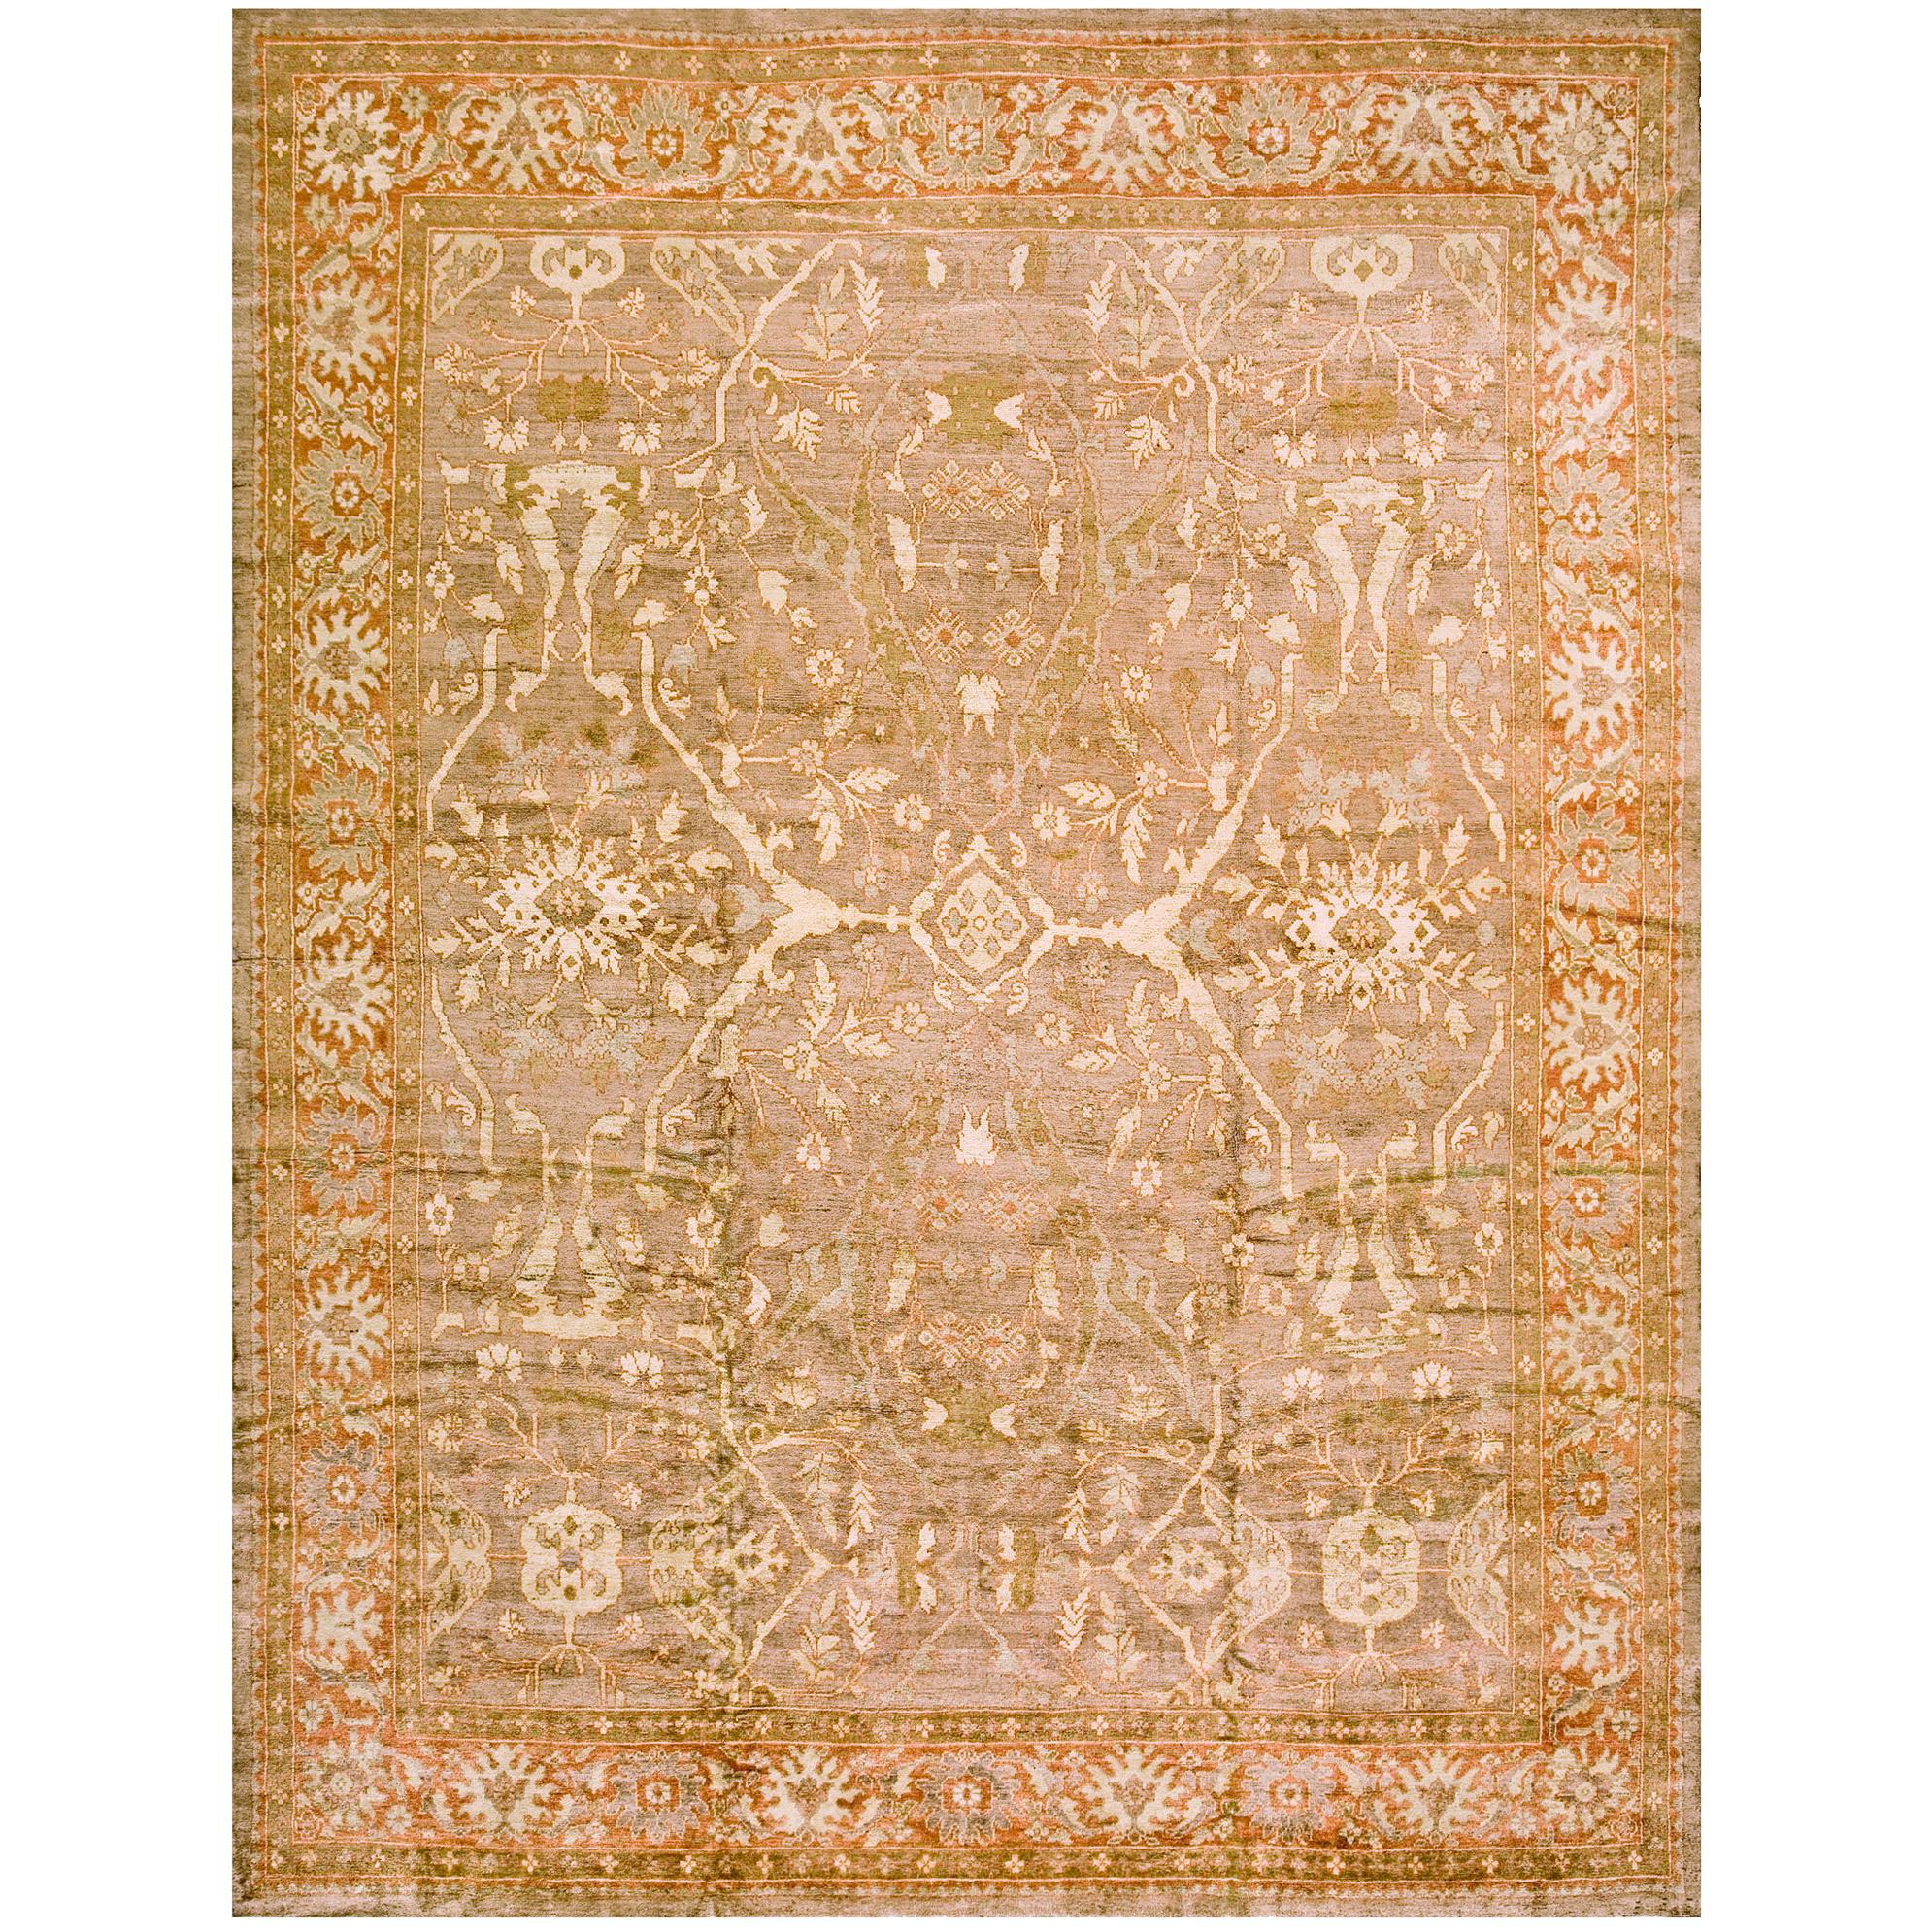 Late 19th Persian Sultanabad Carpet ( 10'4"x 134" - 315 x 406 )